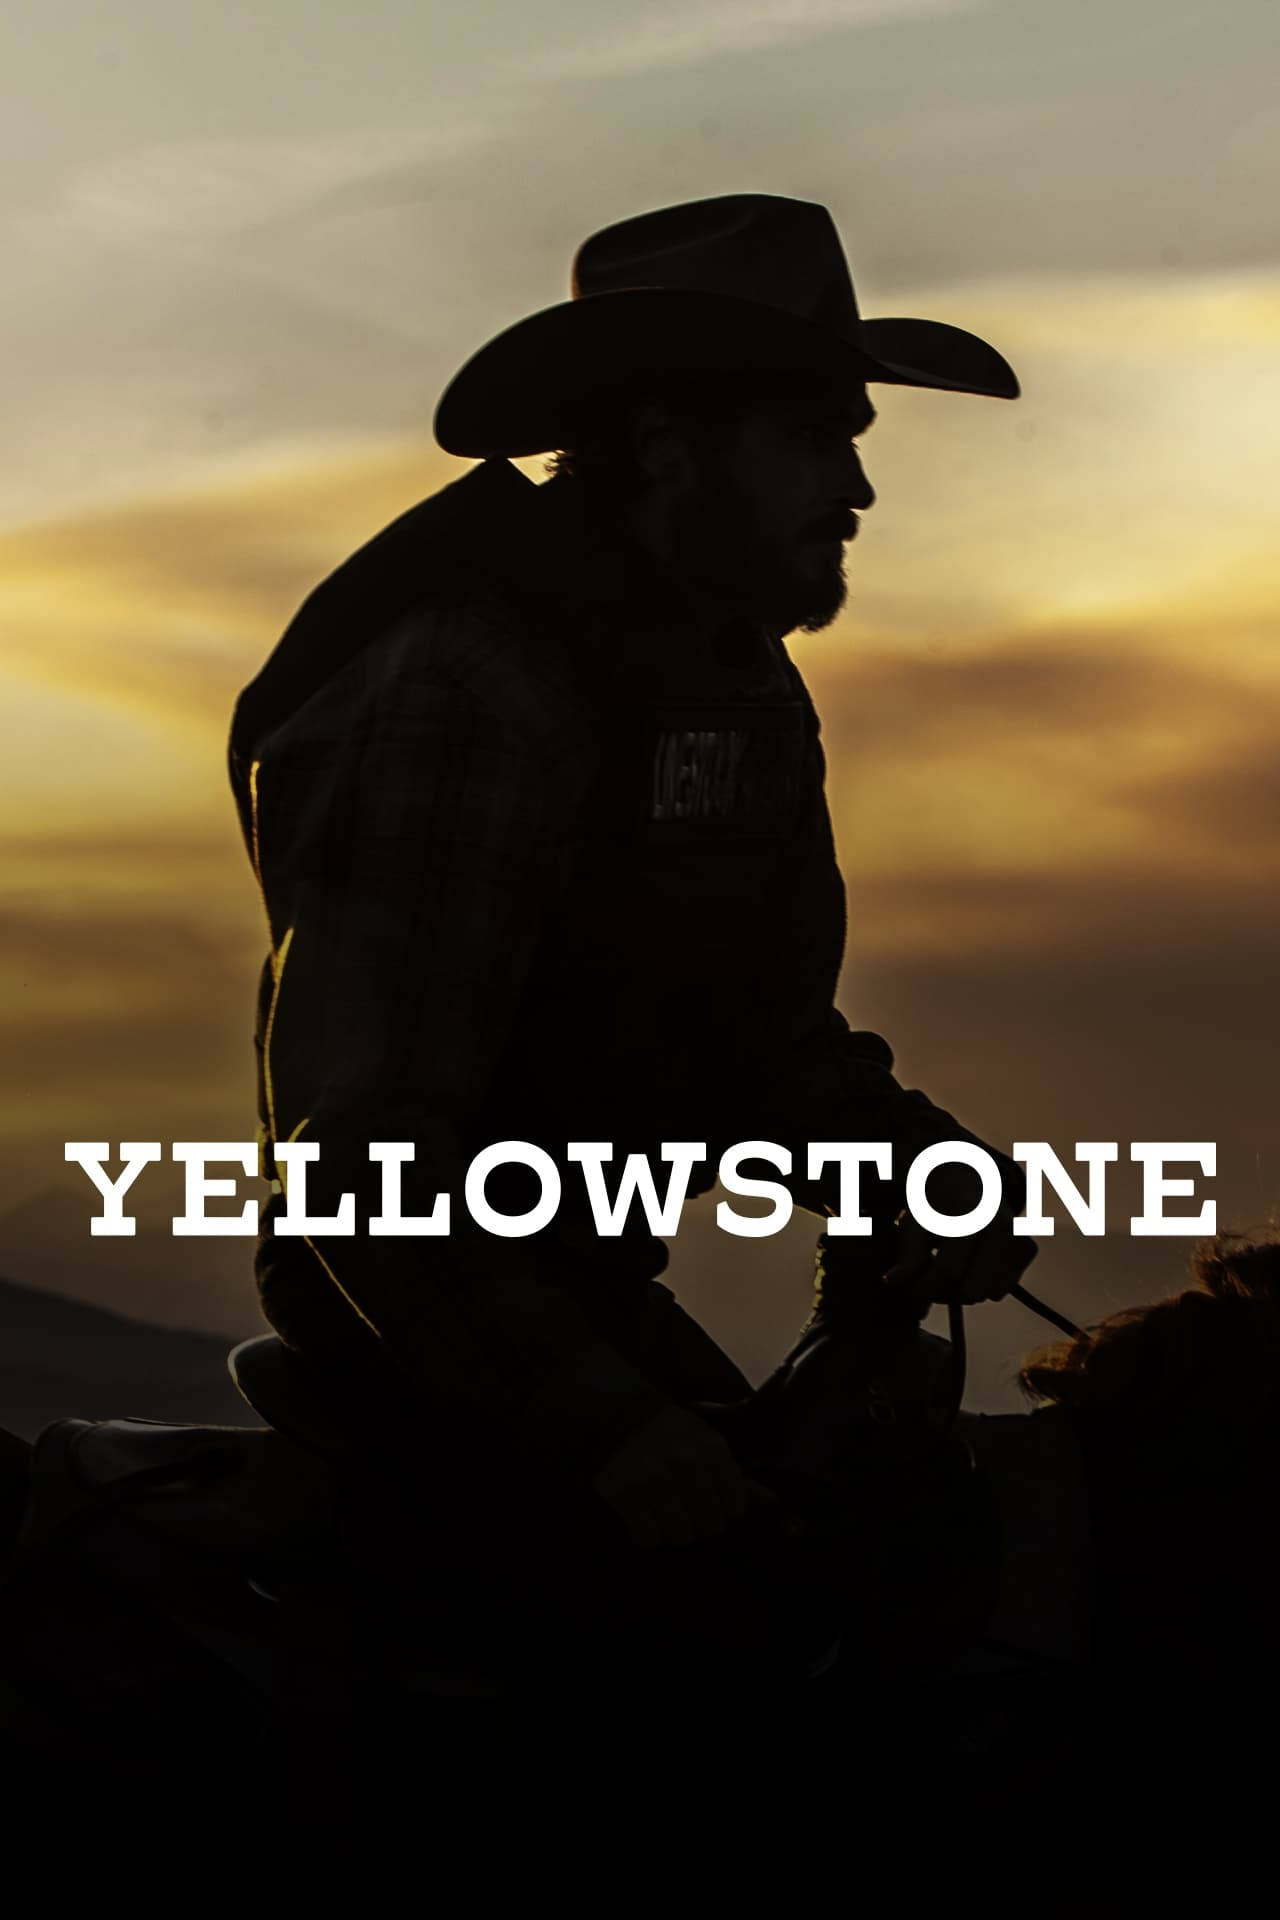 Yellowstone Tv Show Silhouette Poster Wallpaper